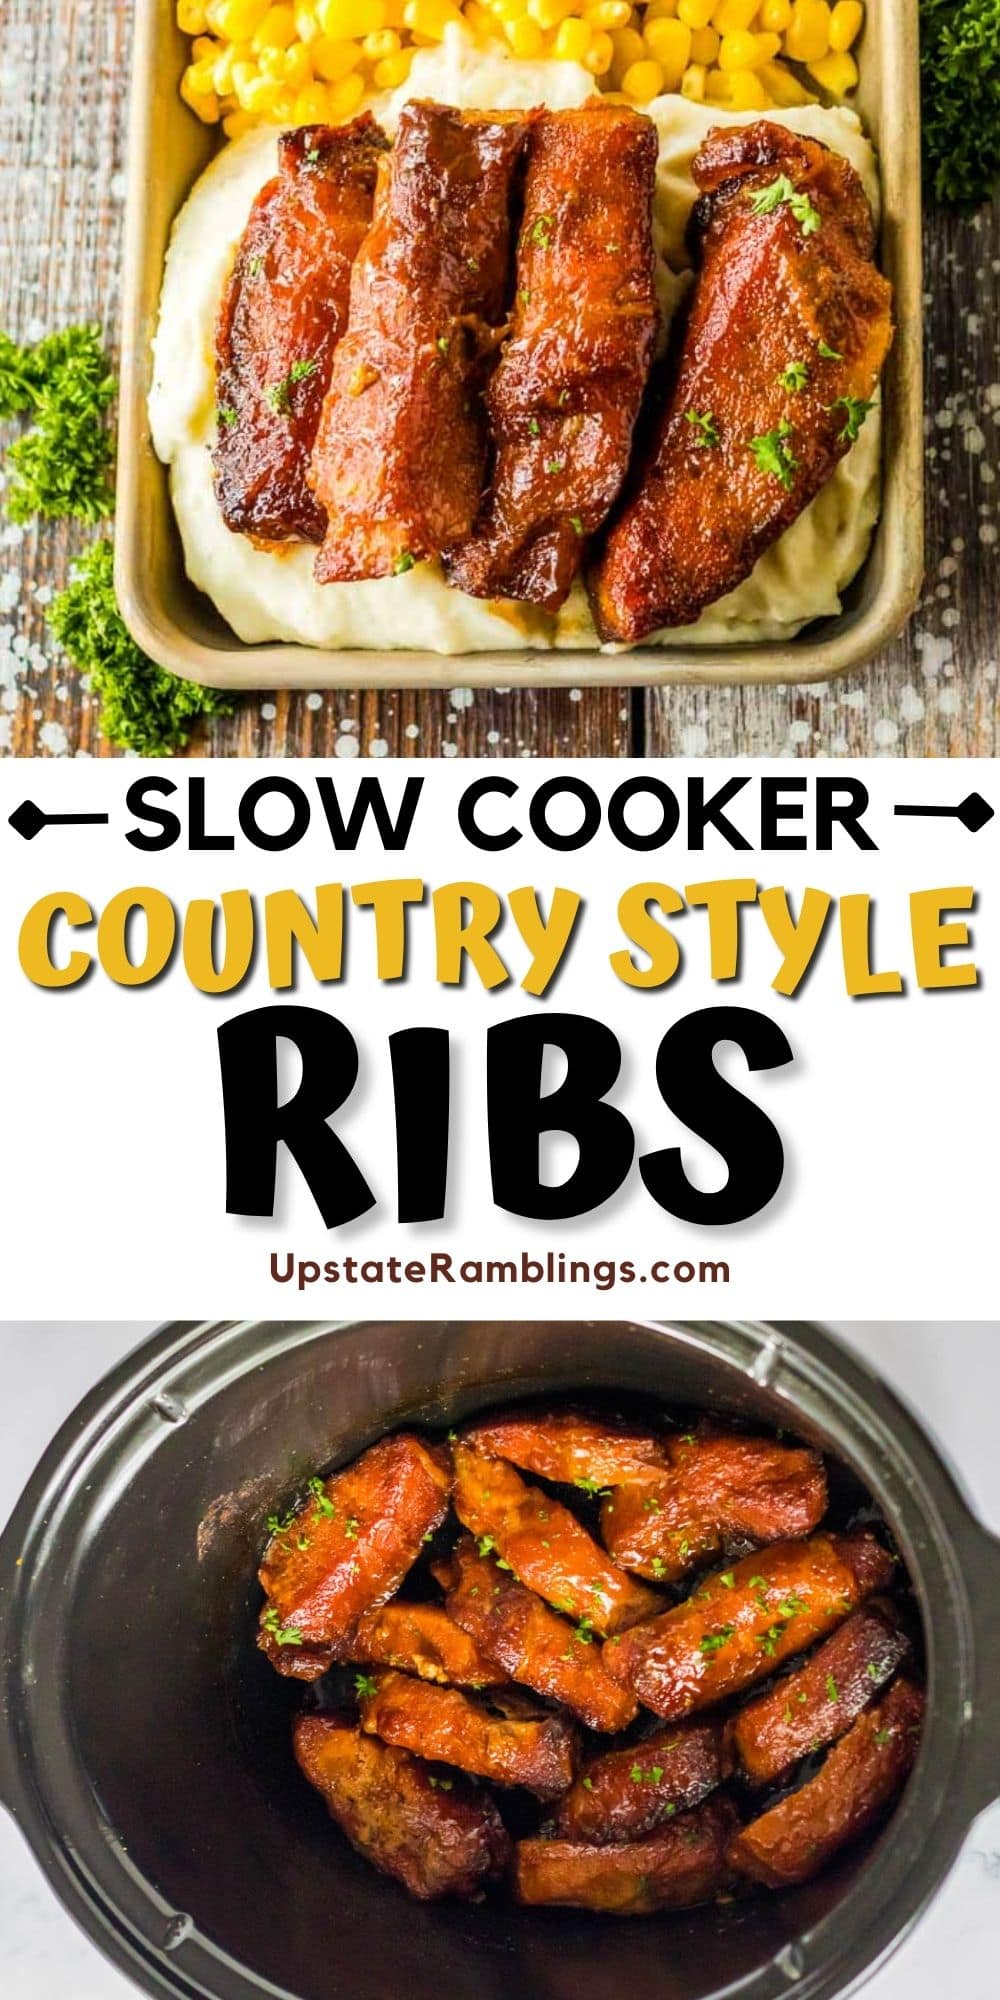 Finger-licking Slow Cooker Country Style Ribs Recipe - Upstate Ramblings